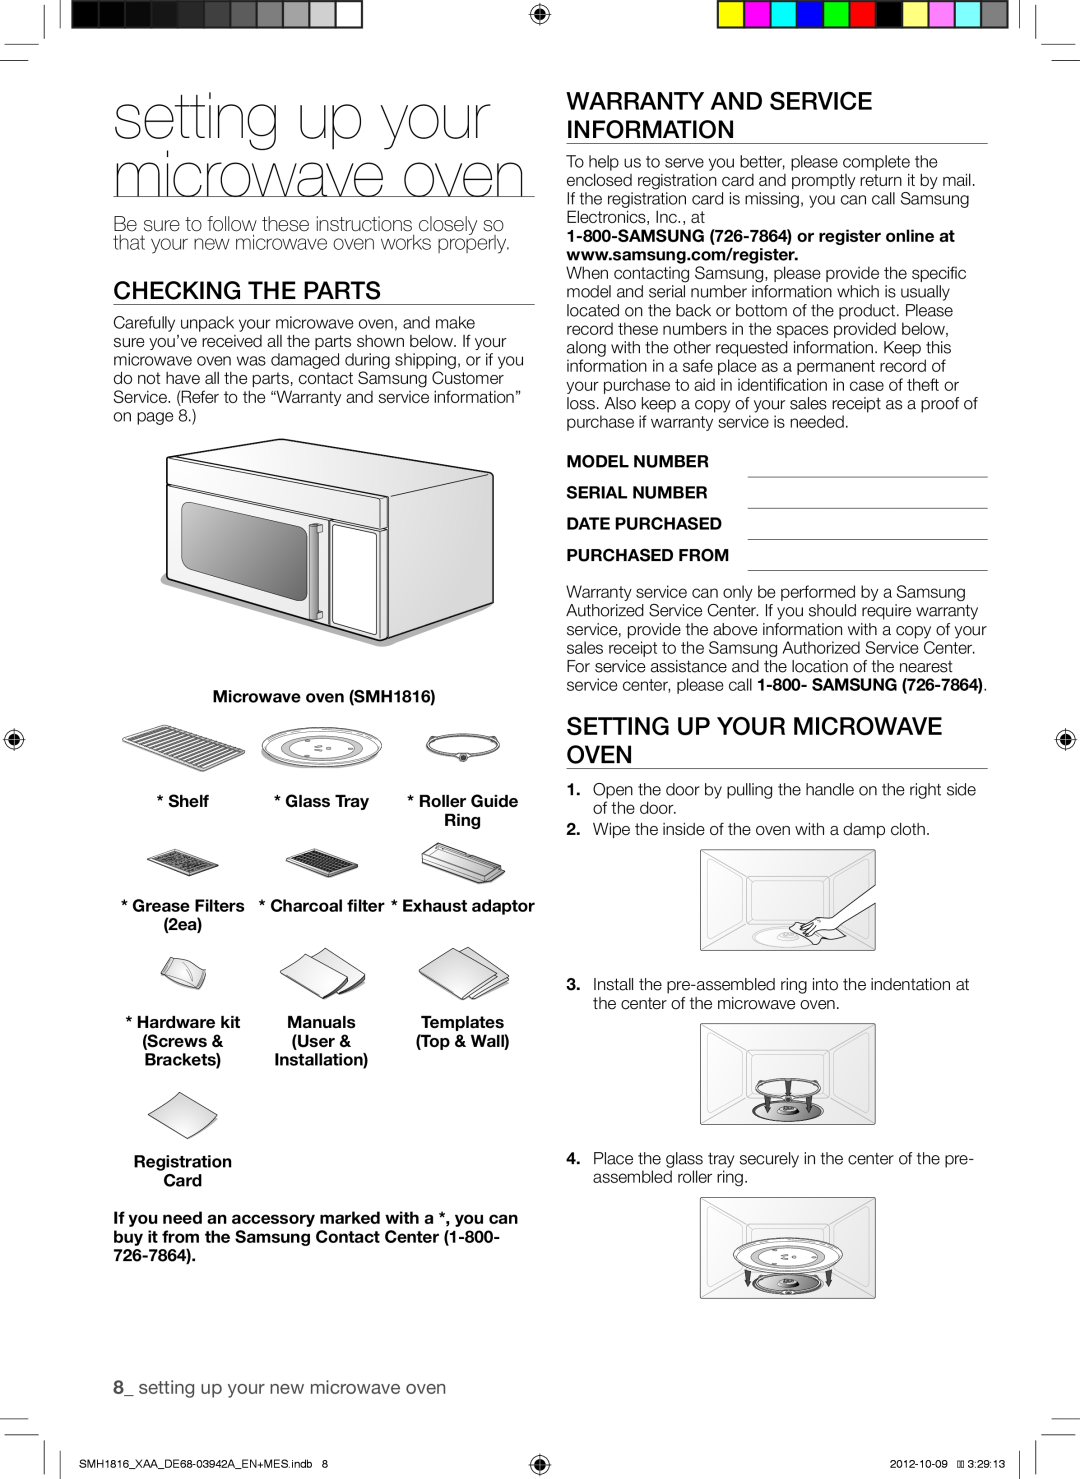 Samsung SMH1816B setting up your microwave oven, Checking The Parts, Warranty And Service Information, Shelf, Glass Tray 